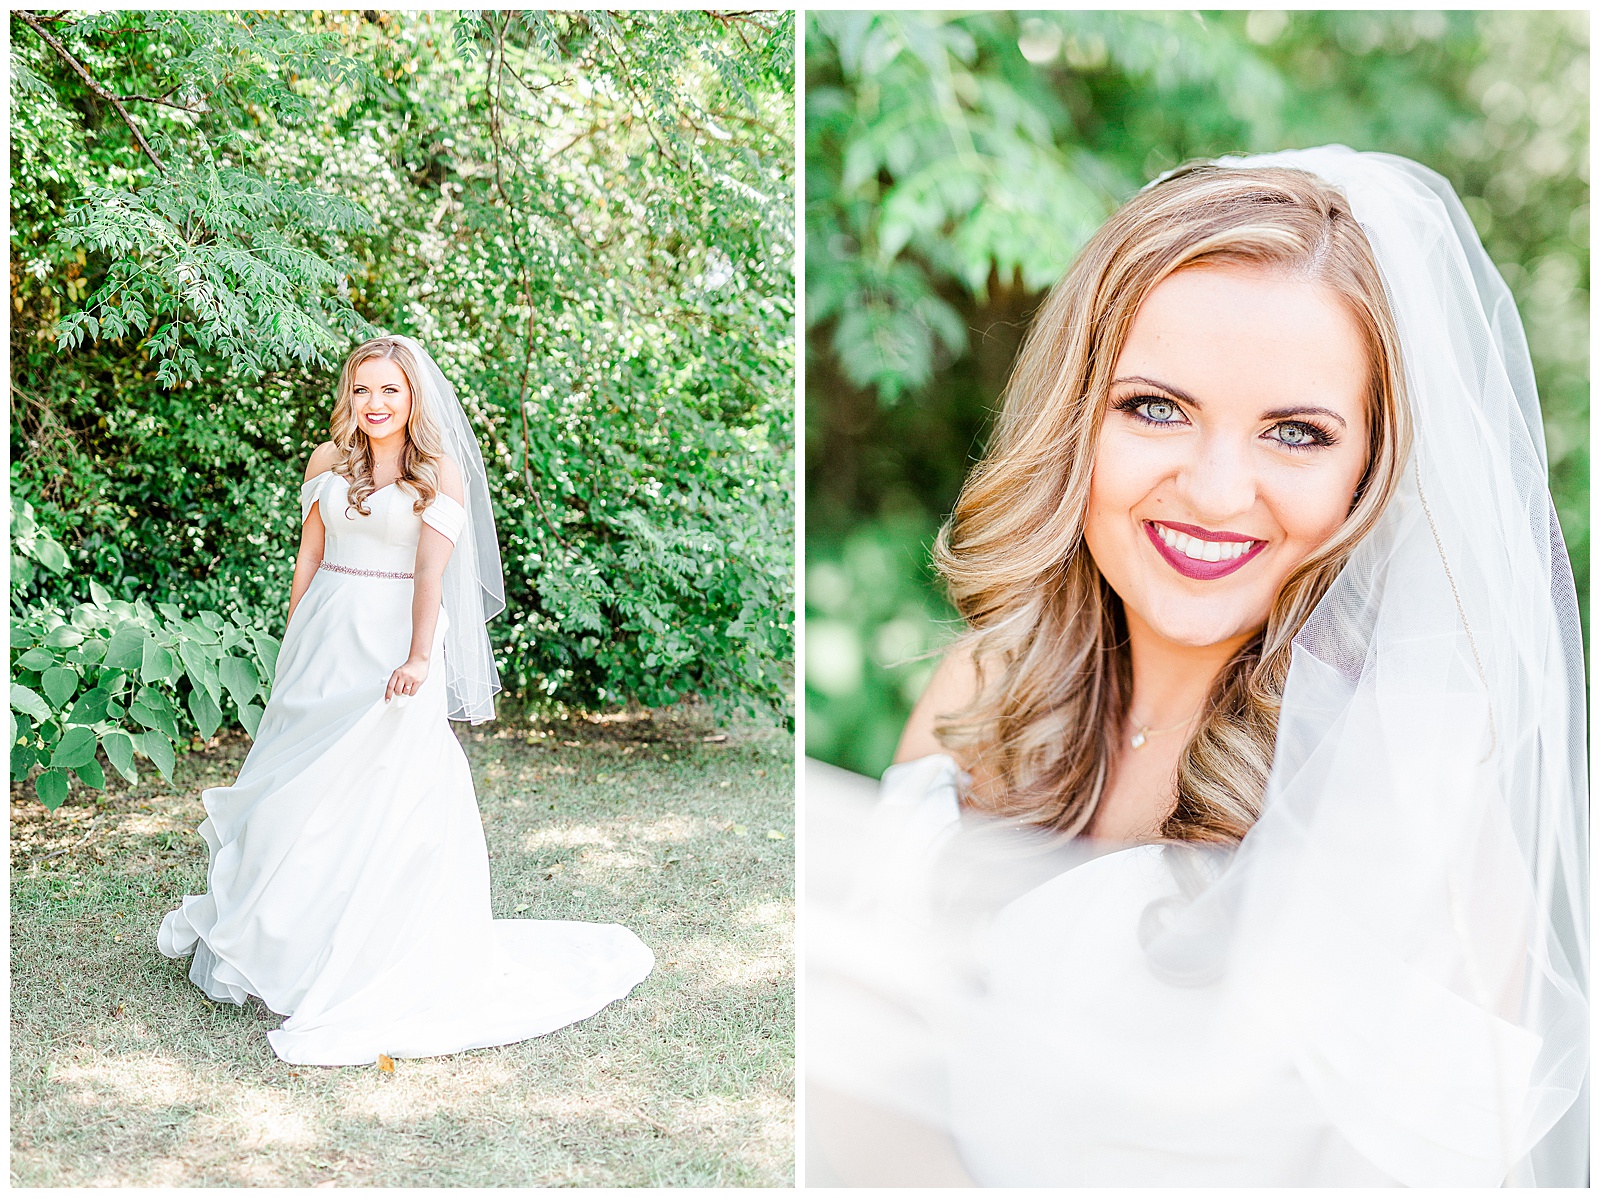 Elegant Off Shoulder Wedding Dress and Veil on Stunning Bride from Summer Wedding in Charlotte, NC | check out the full wedding at KevynDixonPhoto.com